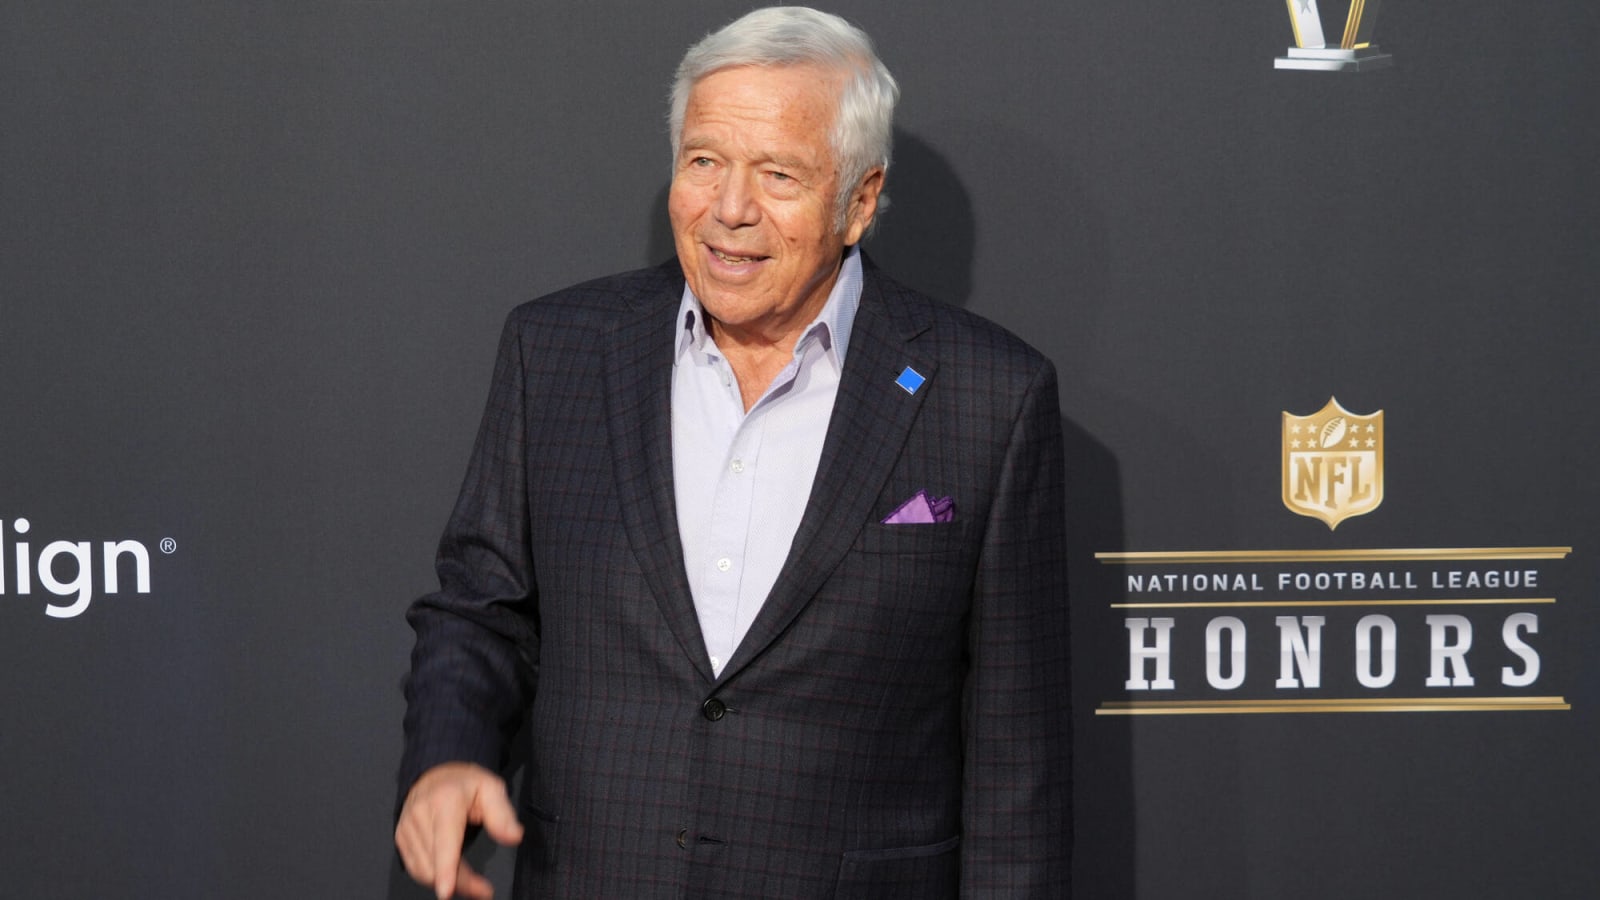 Patriots owner Robert Kraft calls out Columbia professors for hindering freedom of thought amongst students in the wake of anti-Israel protests